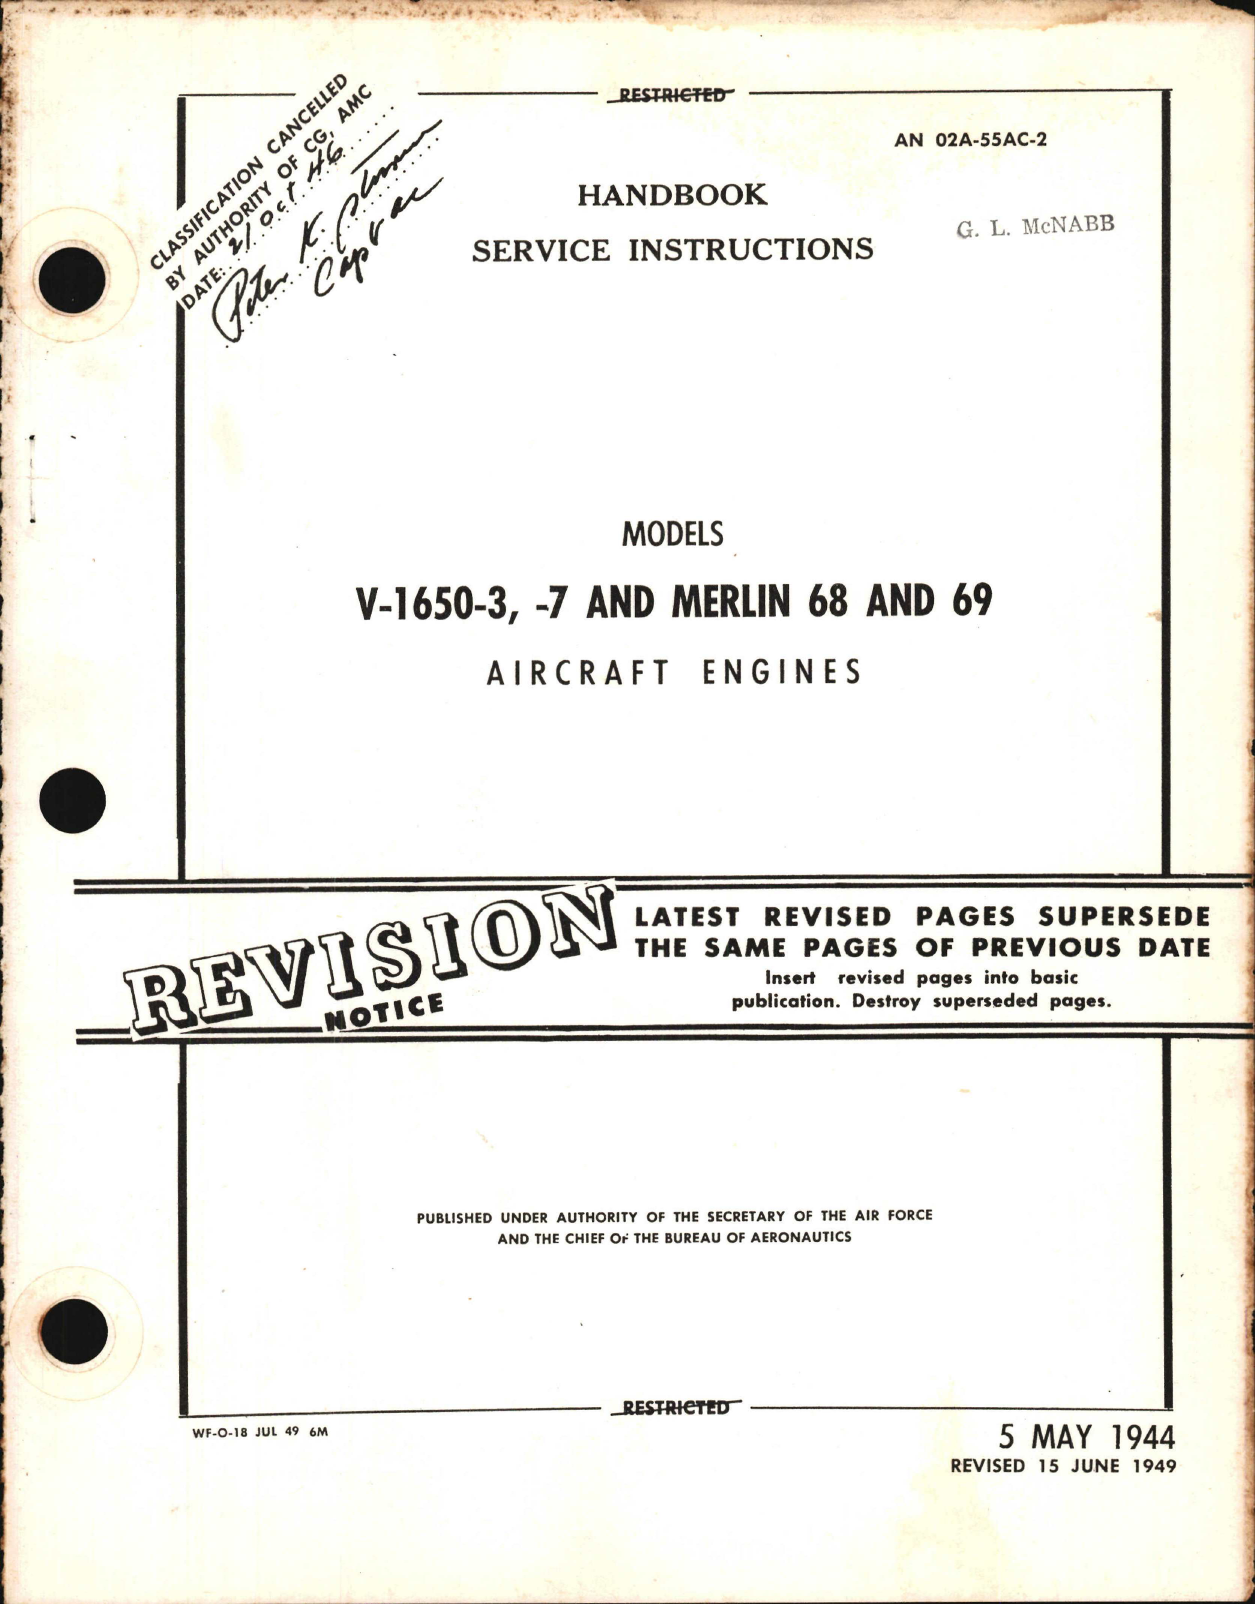 Sample page 1 from AirCorps Library document: Service Instructions for V-1650-3, -7, and Merlin 68 and 69 Engines